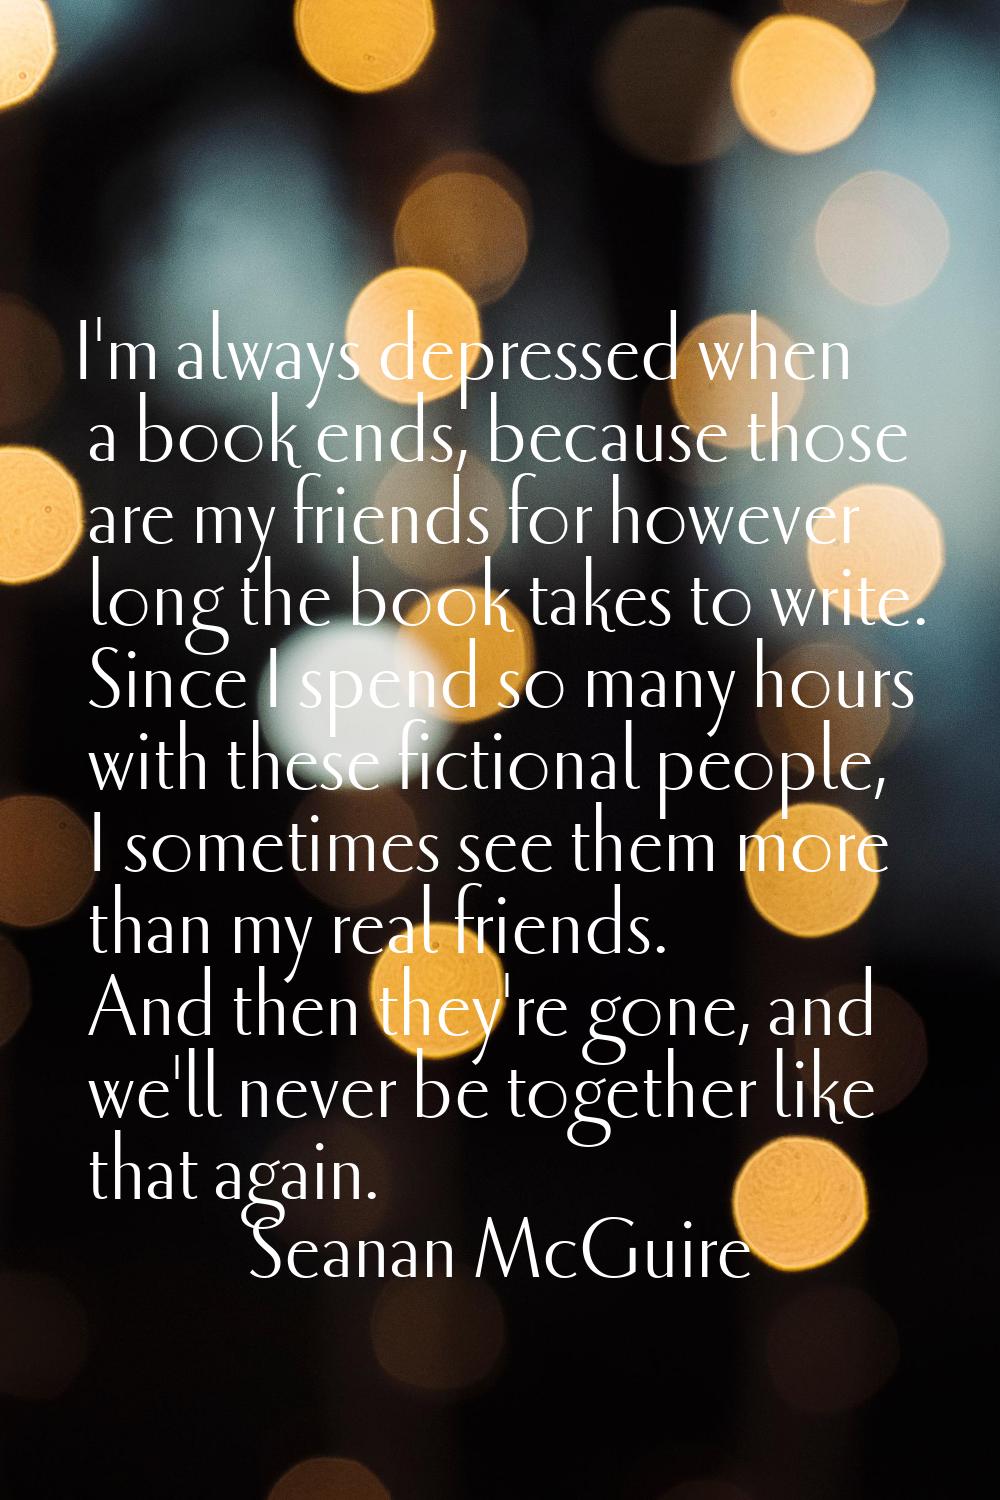 I'm always depressed when a book ends, because those are my friends for however long the book takes